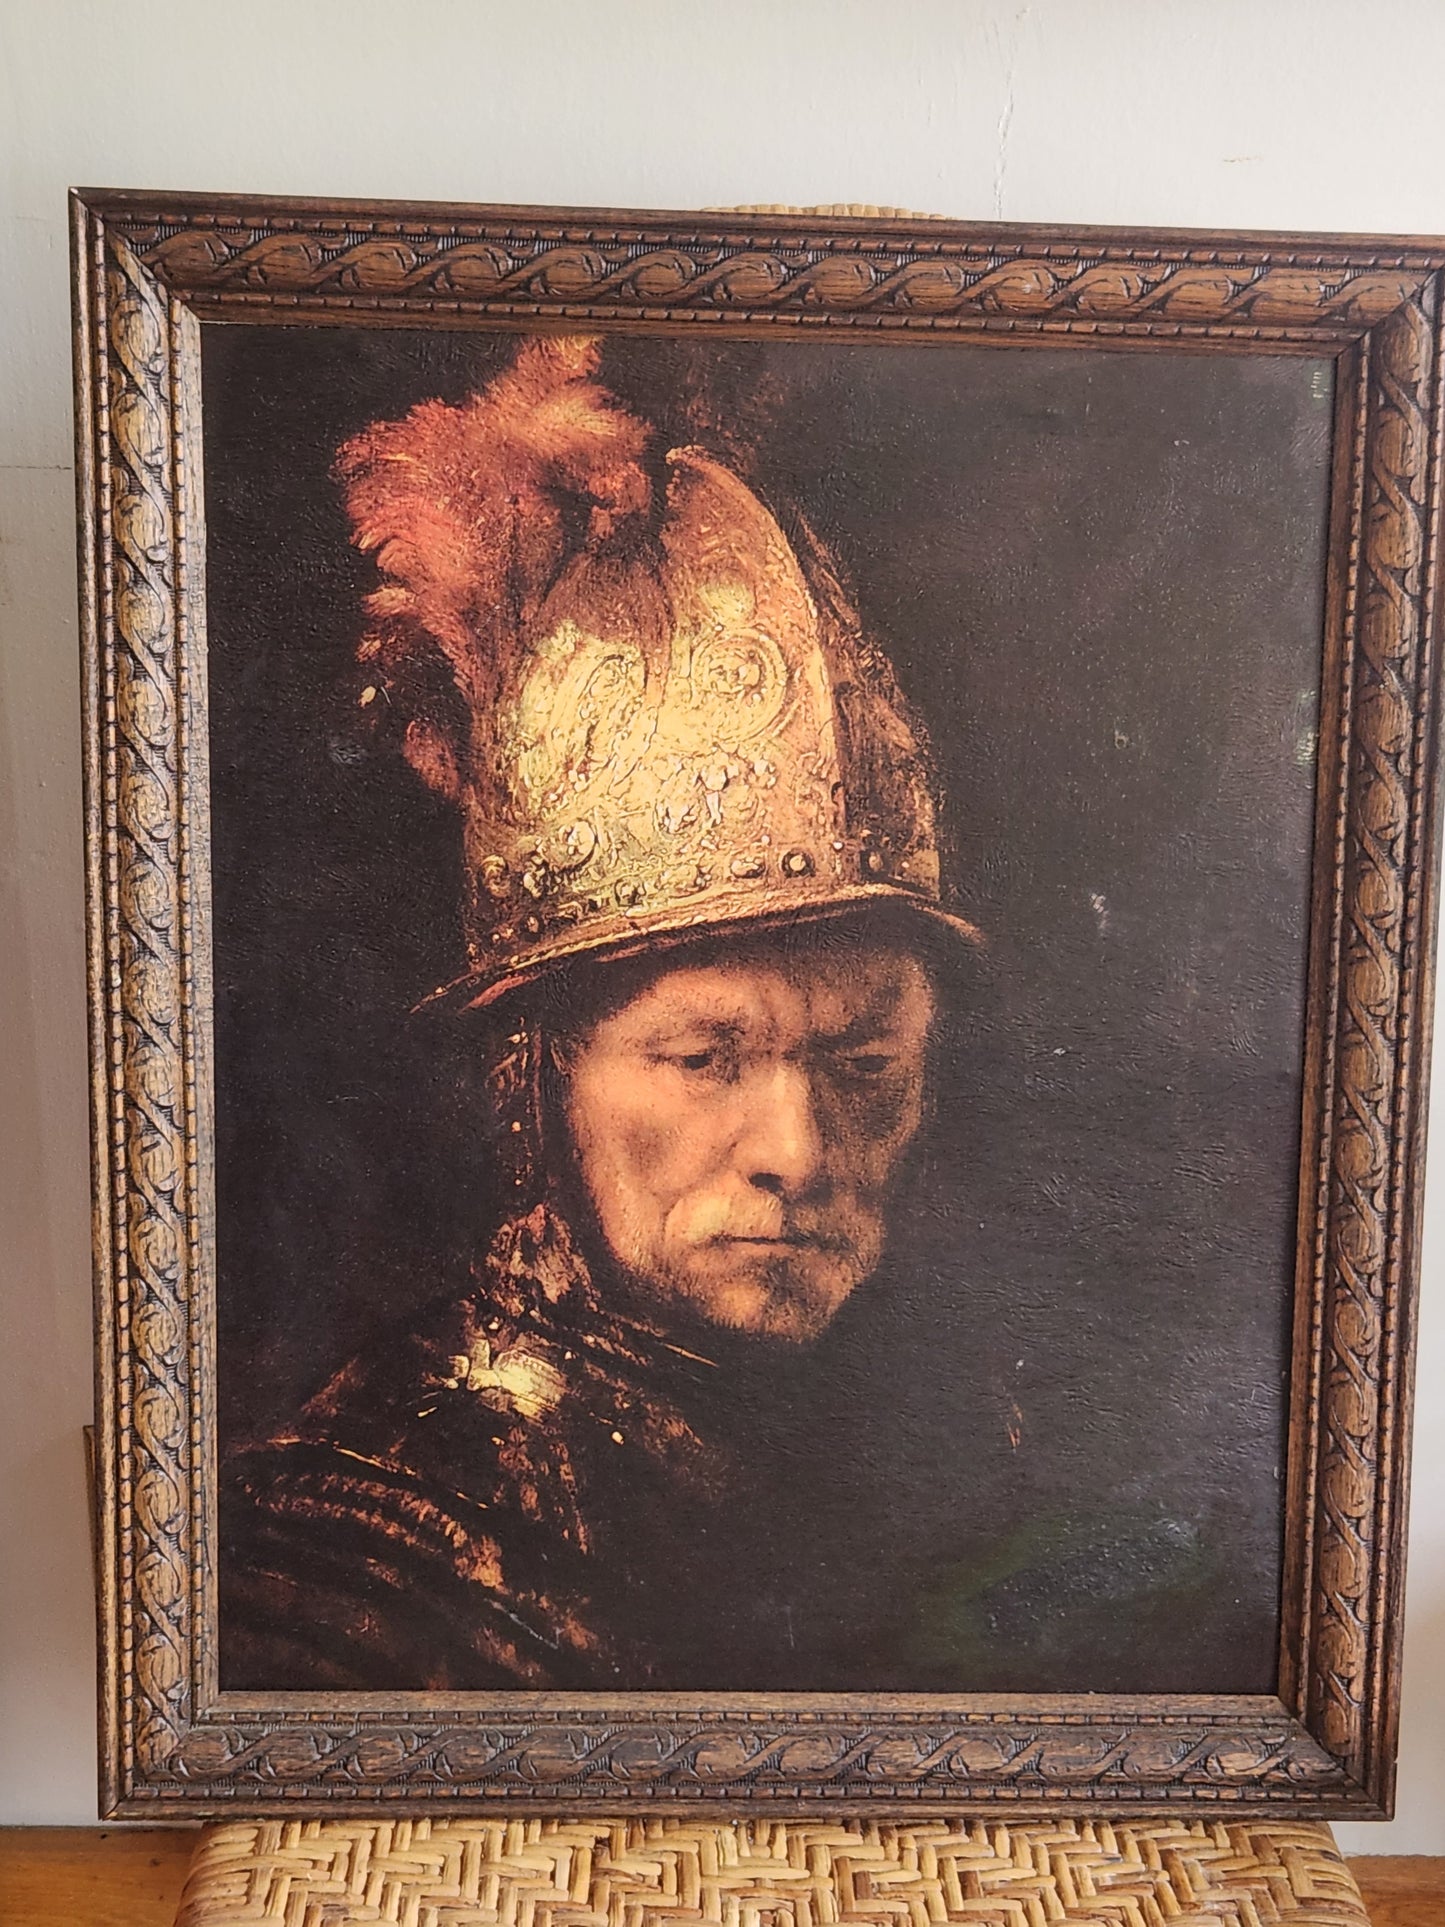 "The Man with the Golden Helmet" Rembrant Print